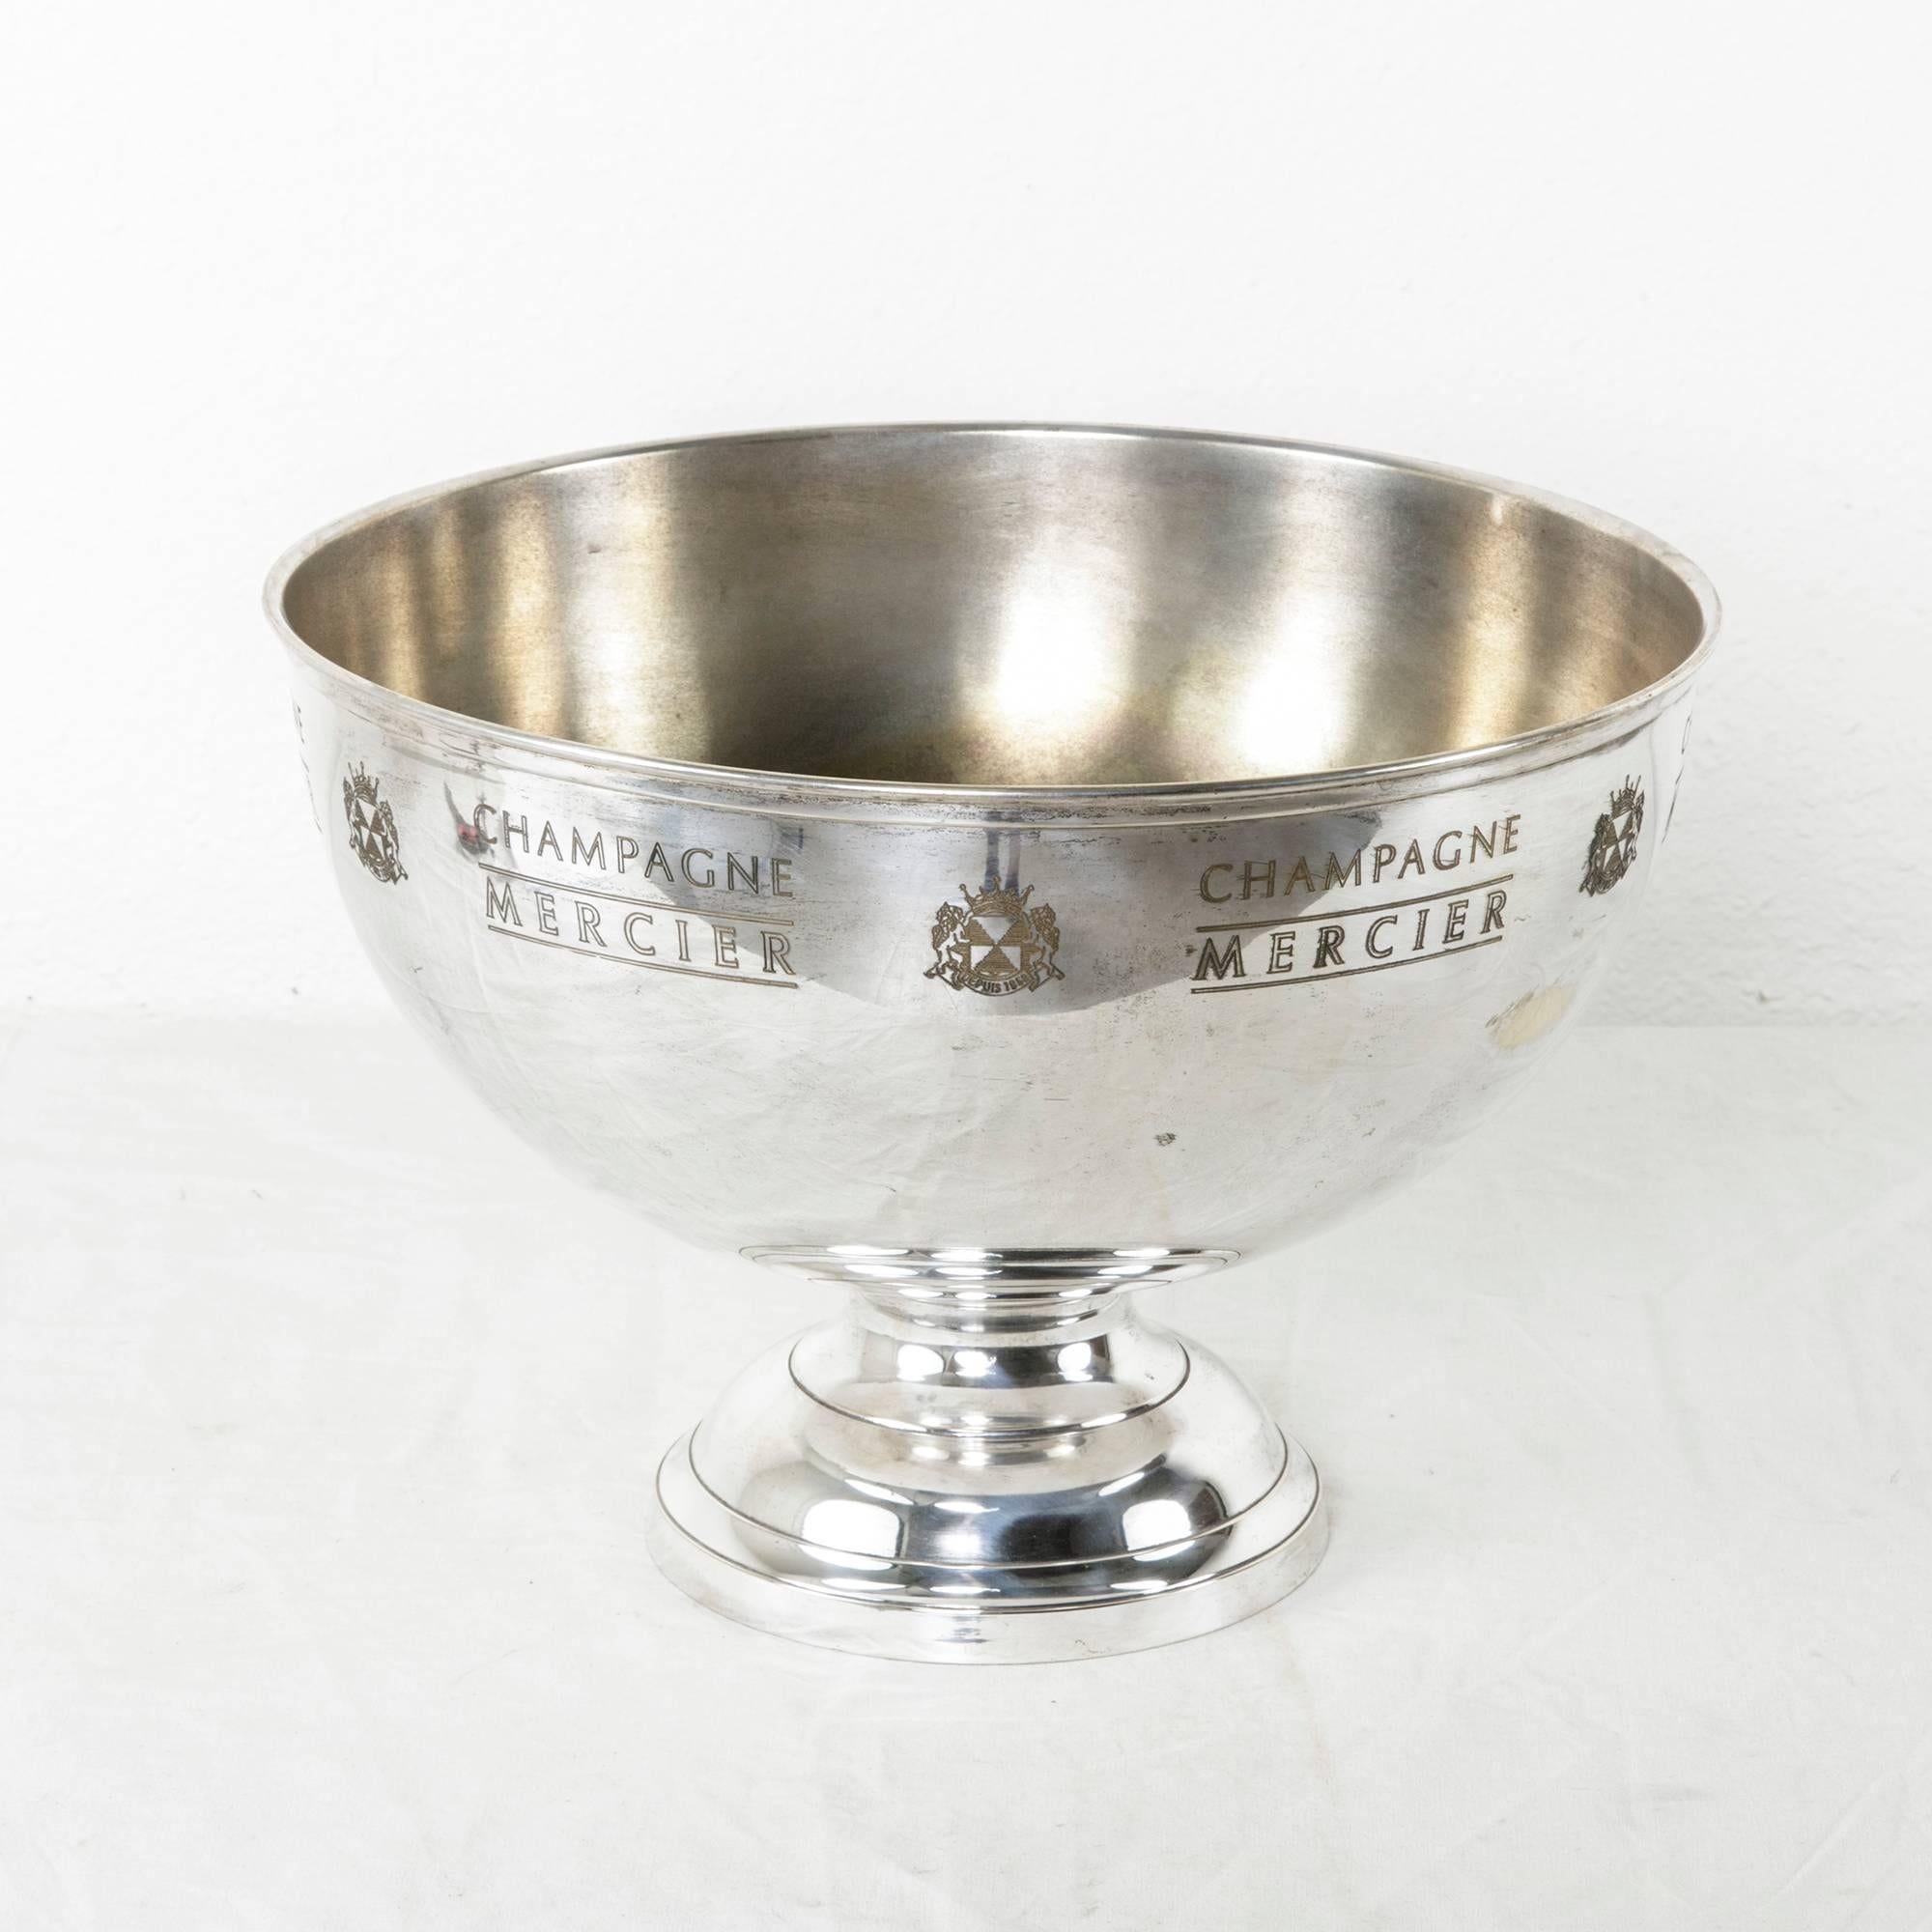 This large hotel champagne bucket is designed to chill up to six bottles at a time and is engraved with the mark of the champagne domain, Mercier. An exquisite bar piece, this silver plate bowl will display beautifully on a sideboard, buffet or